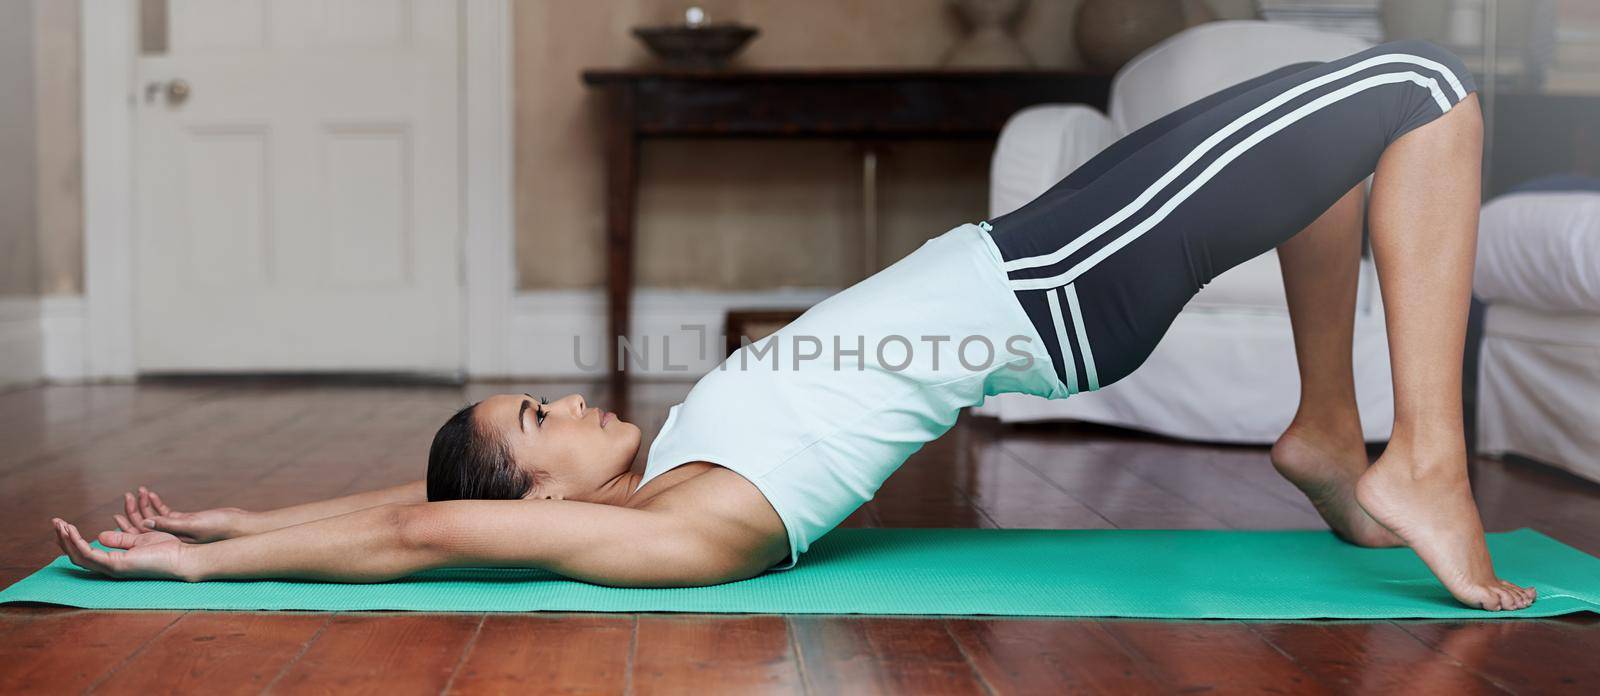 Yoga keeps her body flexible and strong. Full length shot of a young woman doing yoga at home